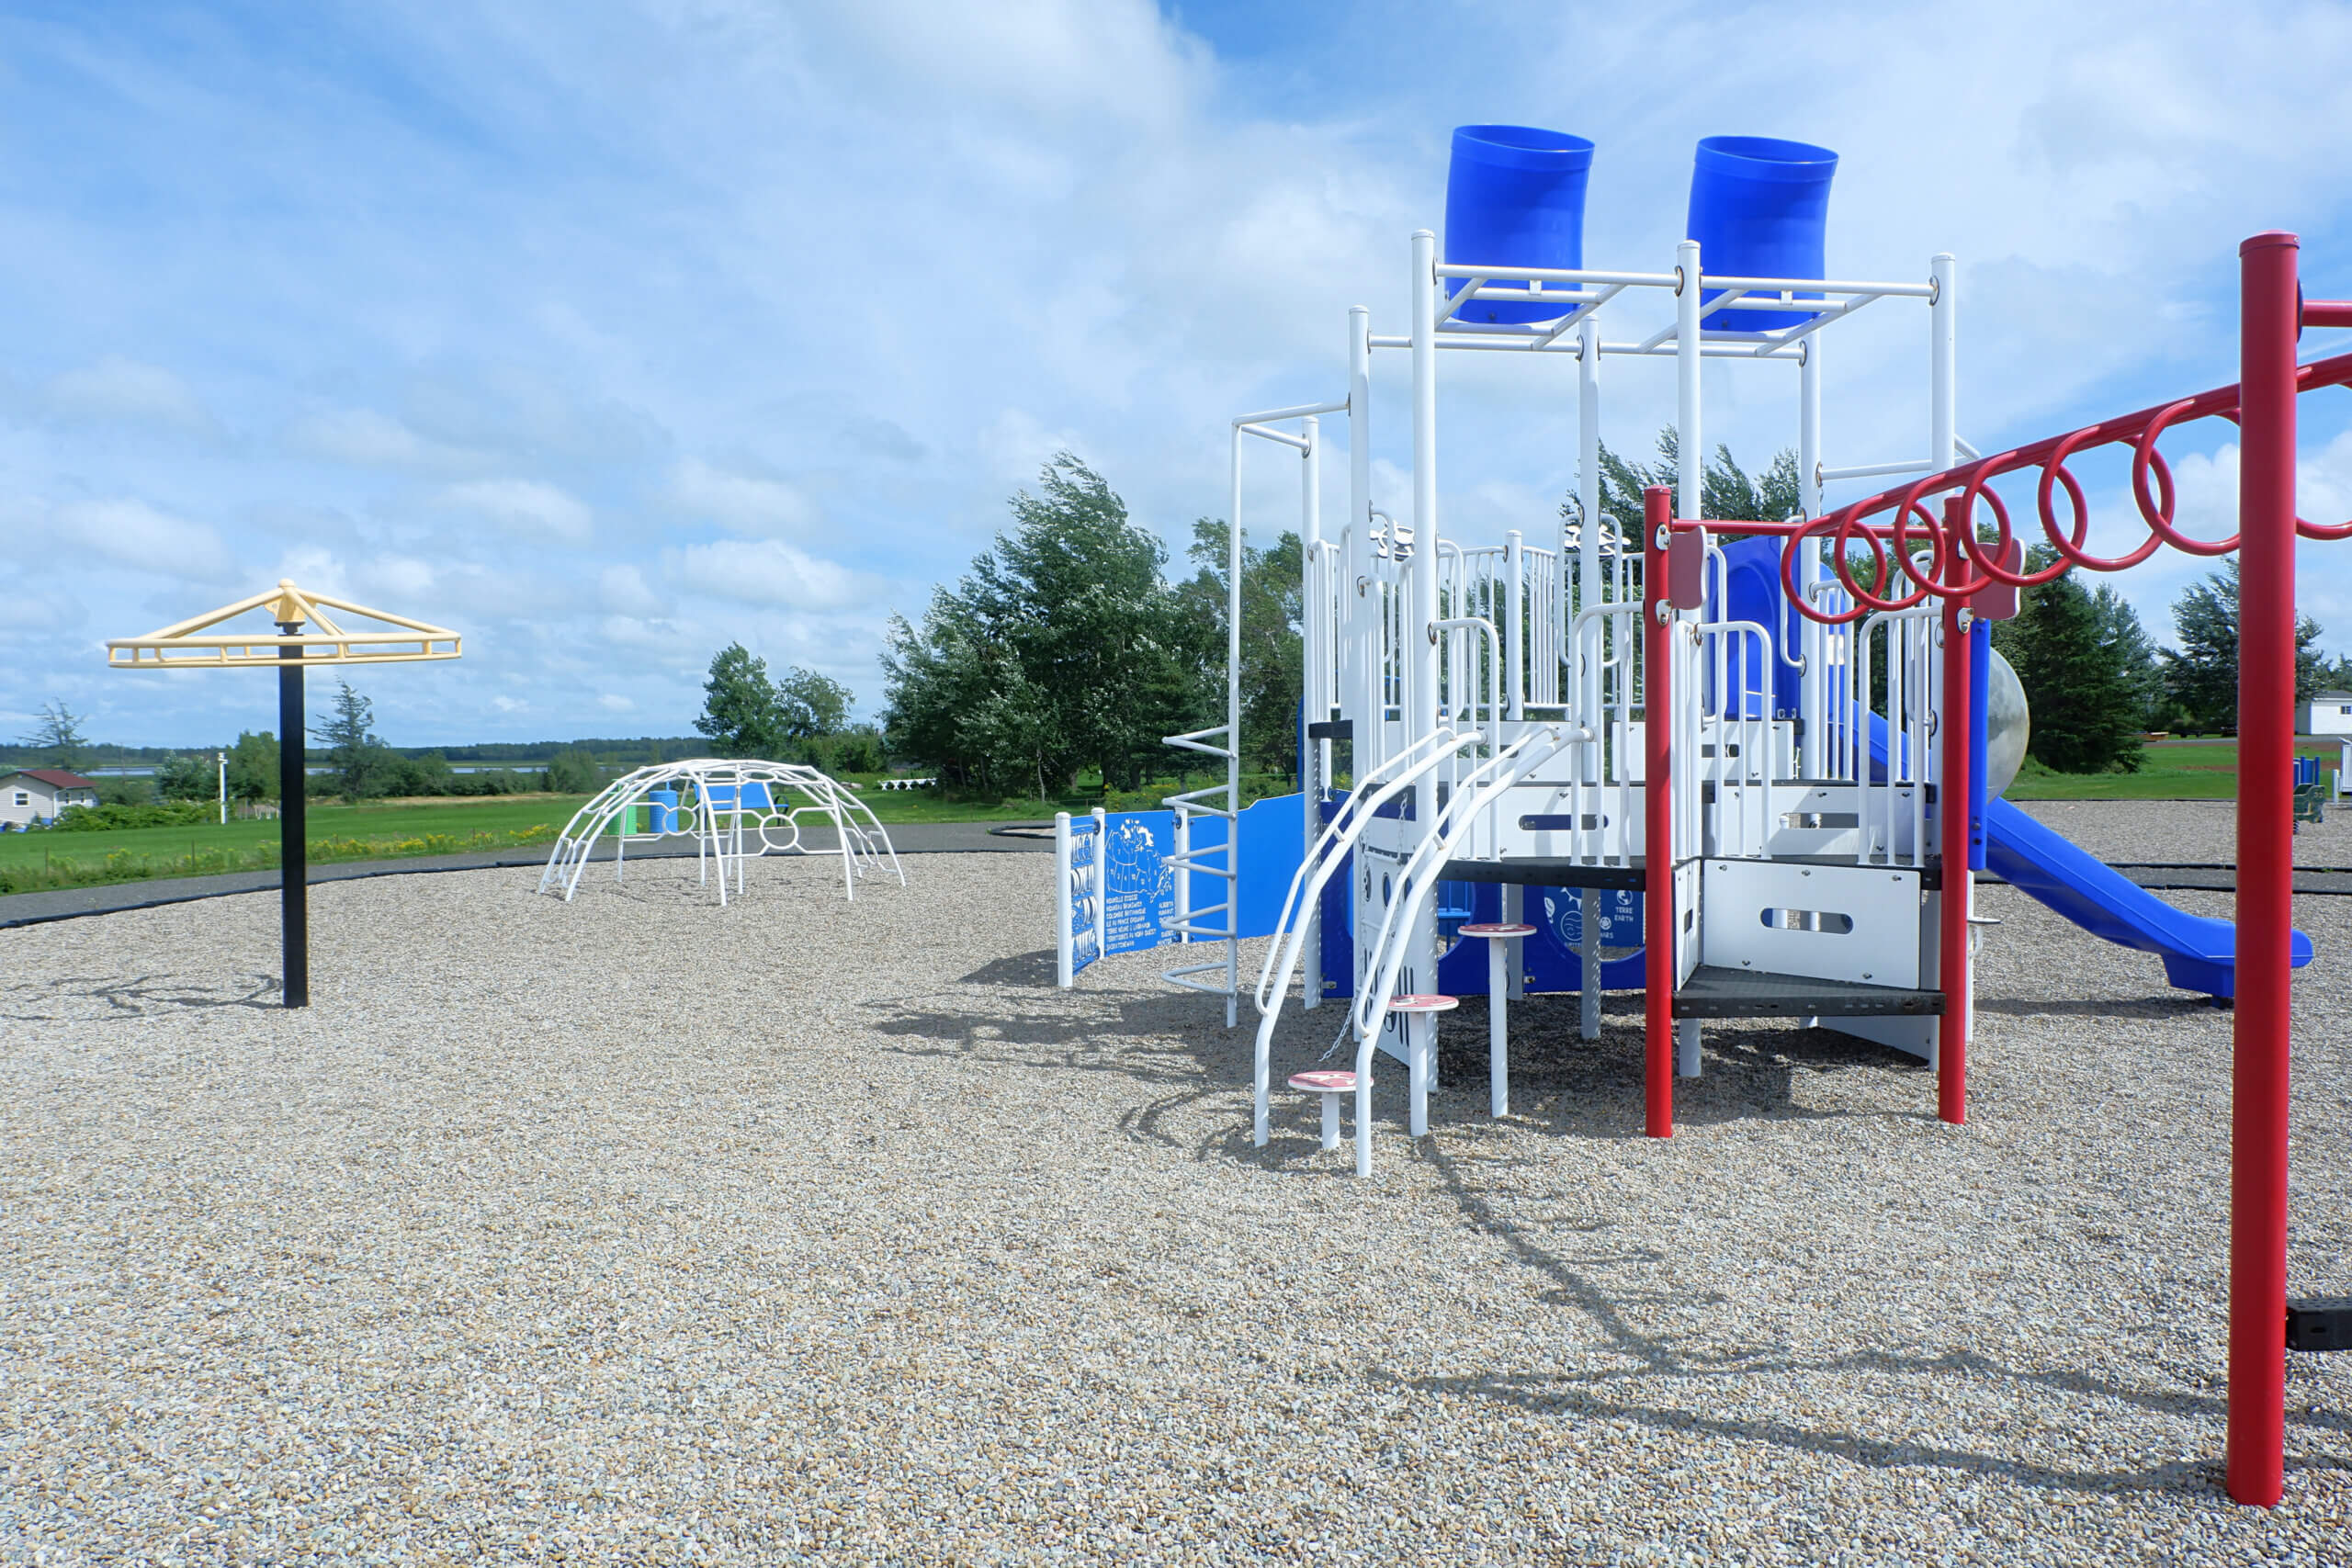 shemogue playground new brunswick pickle planet moncton things to do on the way to pei